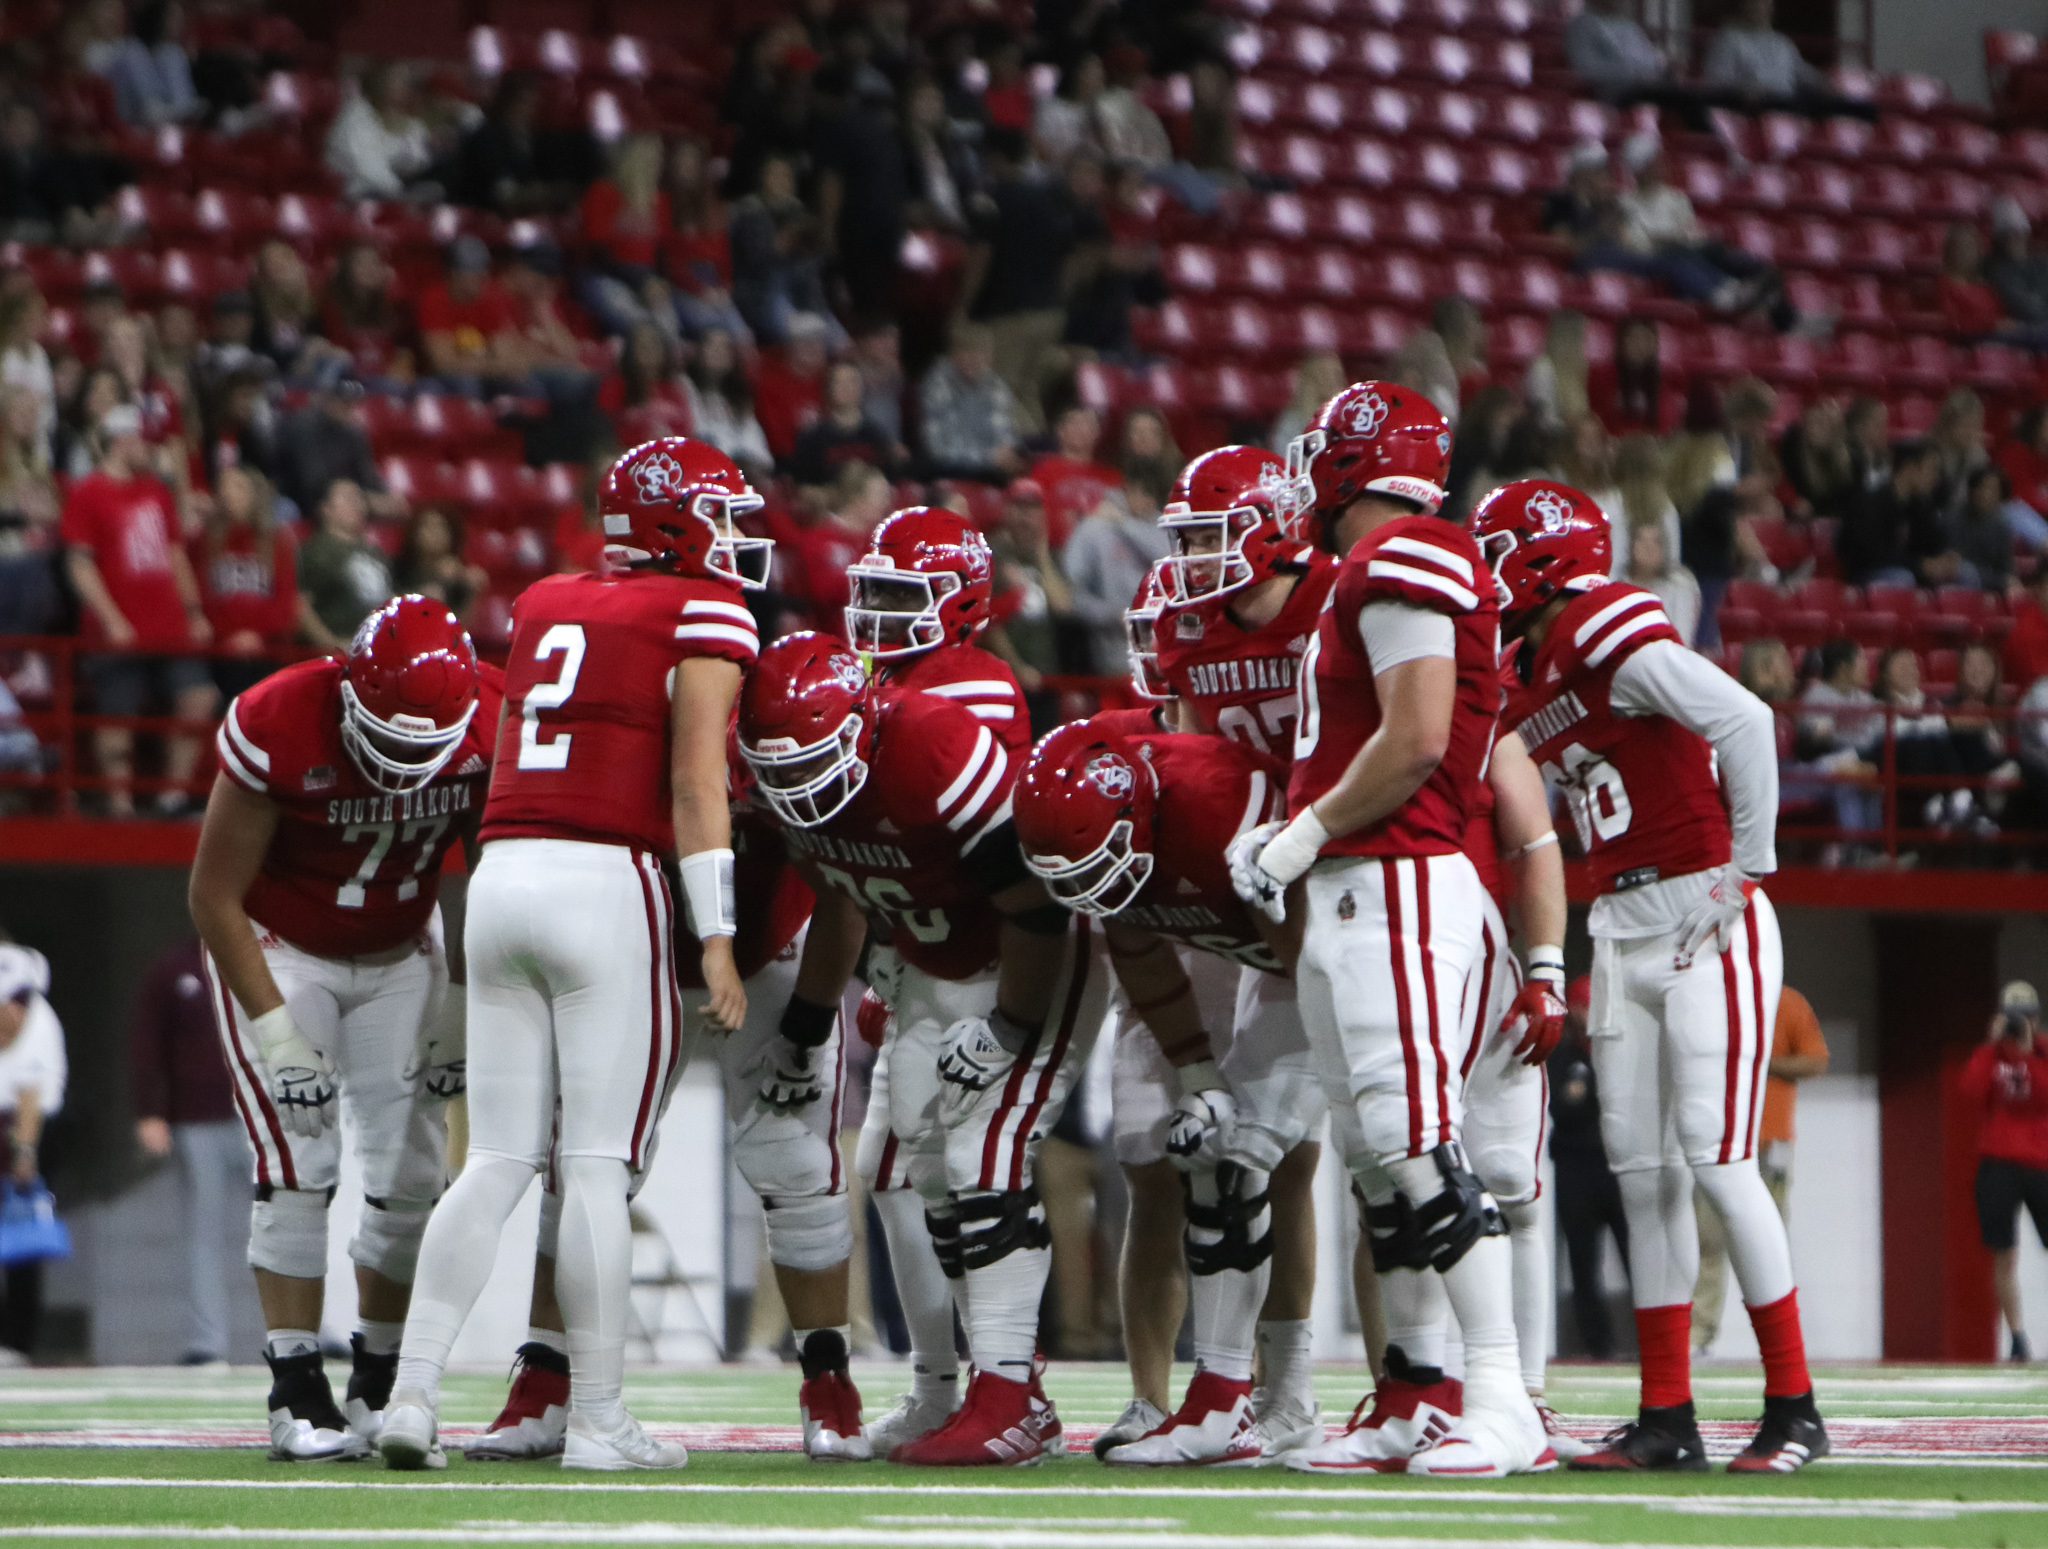 Nielson, USD Football Hoping to Bounce Back